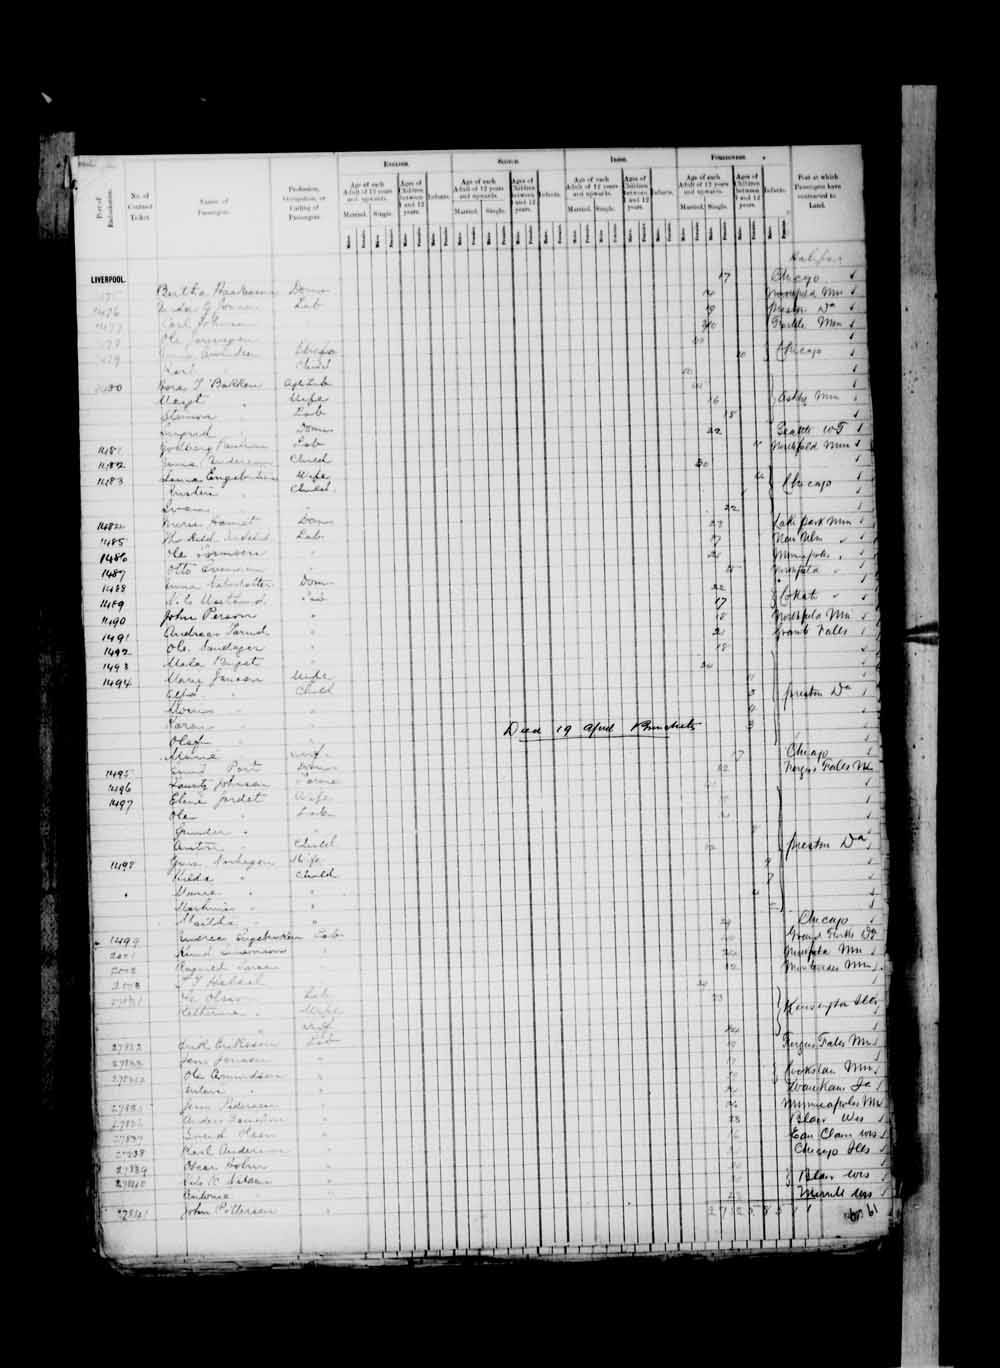 Digitized page of Passenger Lists for Image No.: e003674937